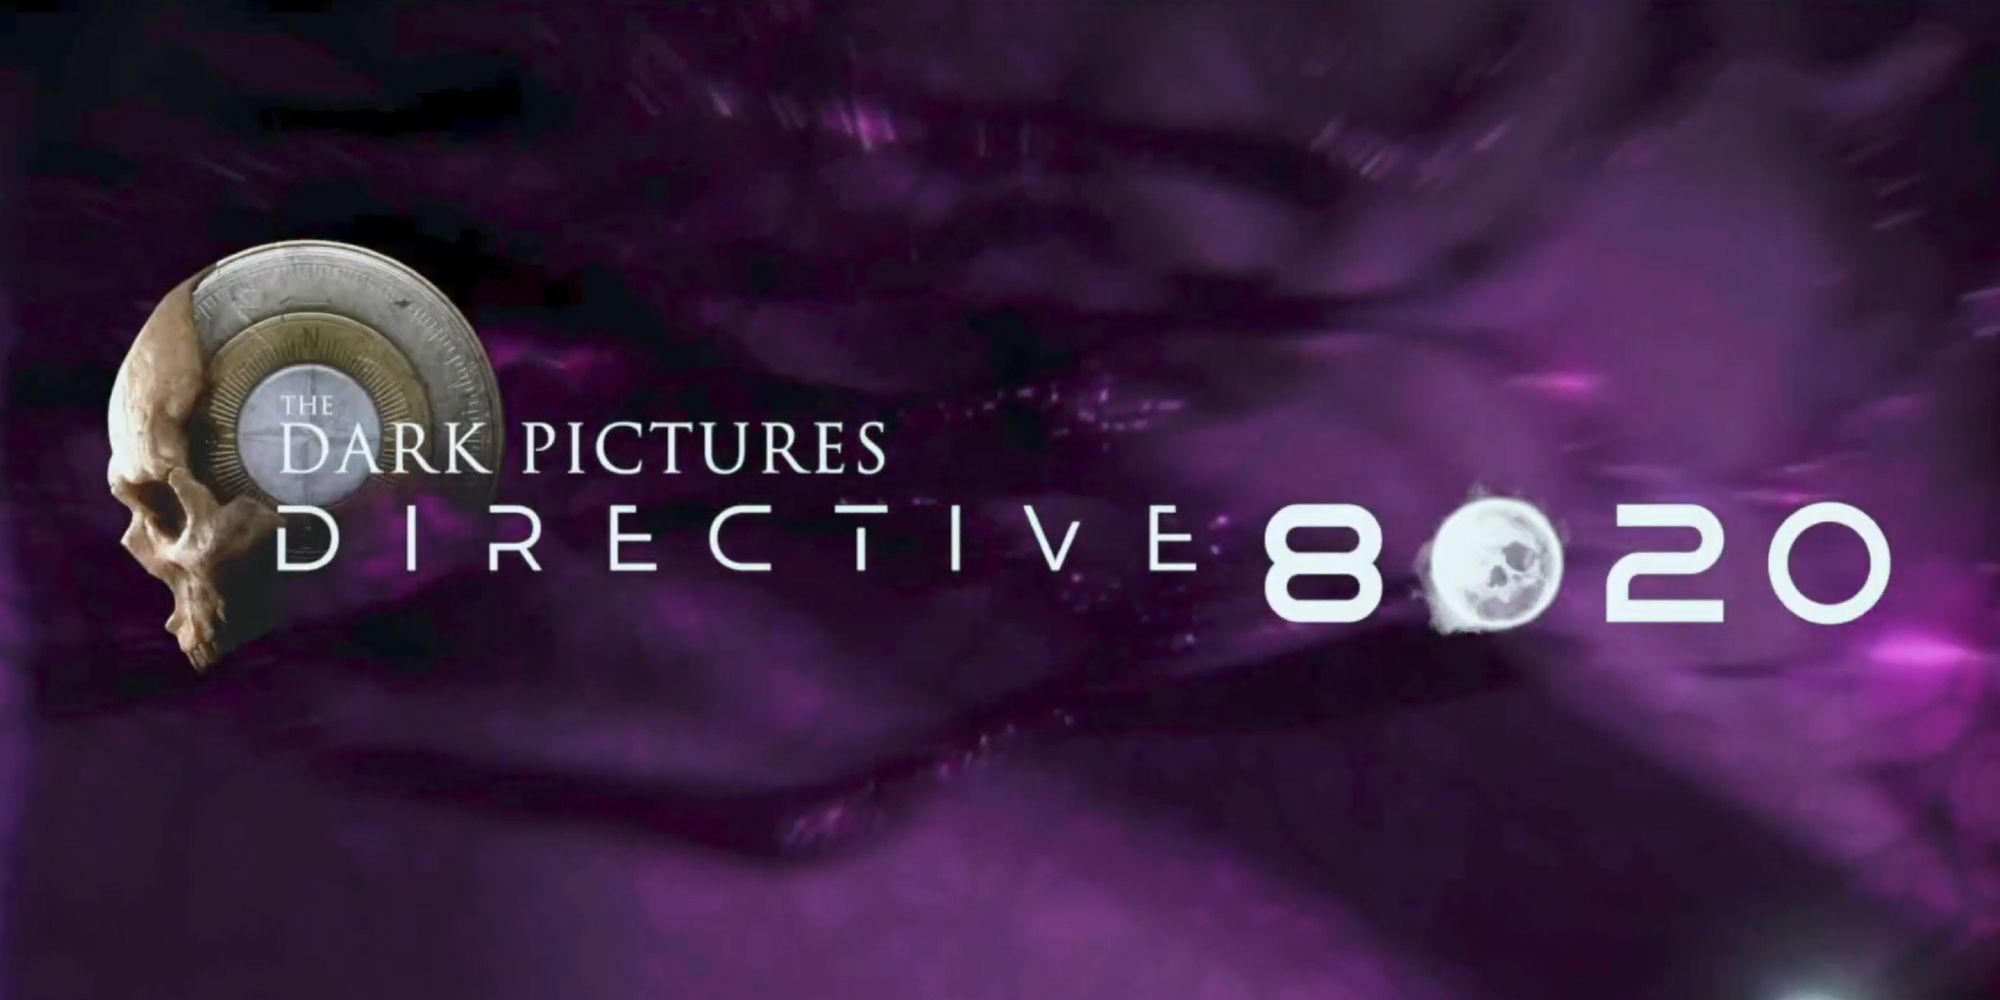 Directive 8020 title screen 